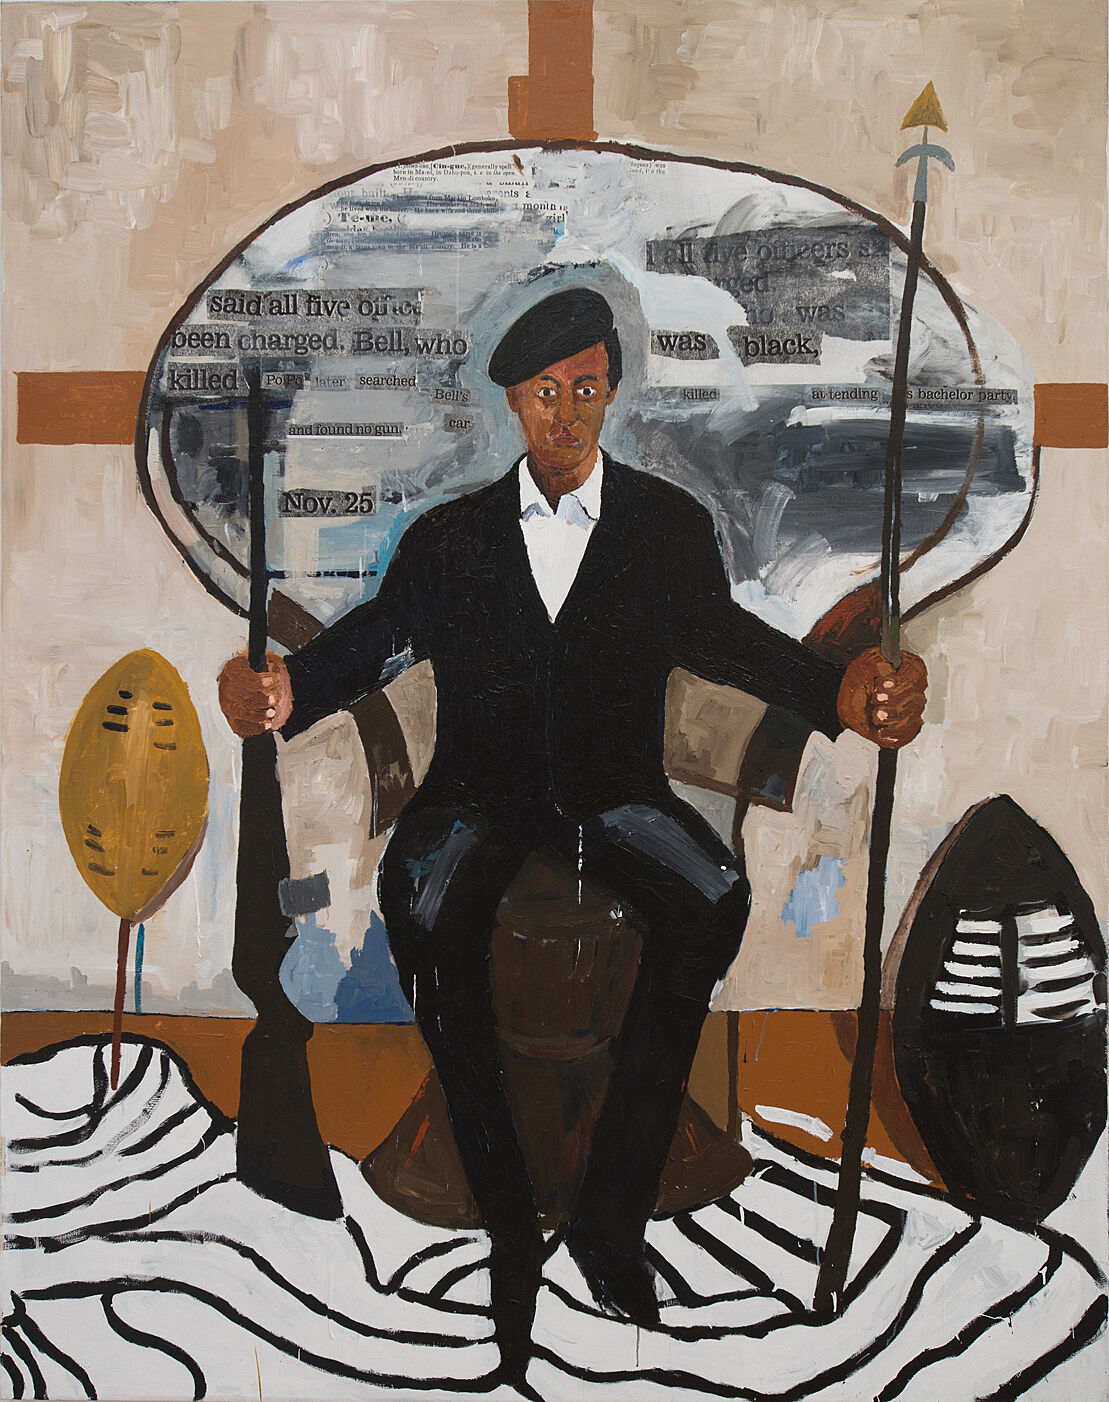 A Black man wearing a black beret, suit jacket, and slacks sits in a peacock chair. The back of his chair is various shades of grey and features glimpses of newspaper clippings throughout. He holds a spear in his left hand and a rifle in the other. The floor is rust colored with an irregularly shaped zebra print rug. The wall behind him is off-white with rust colored intersecting lines.